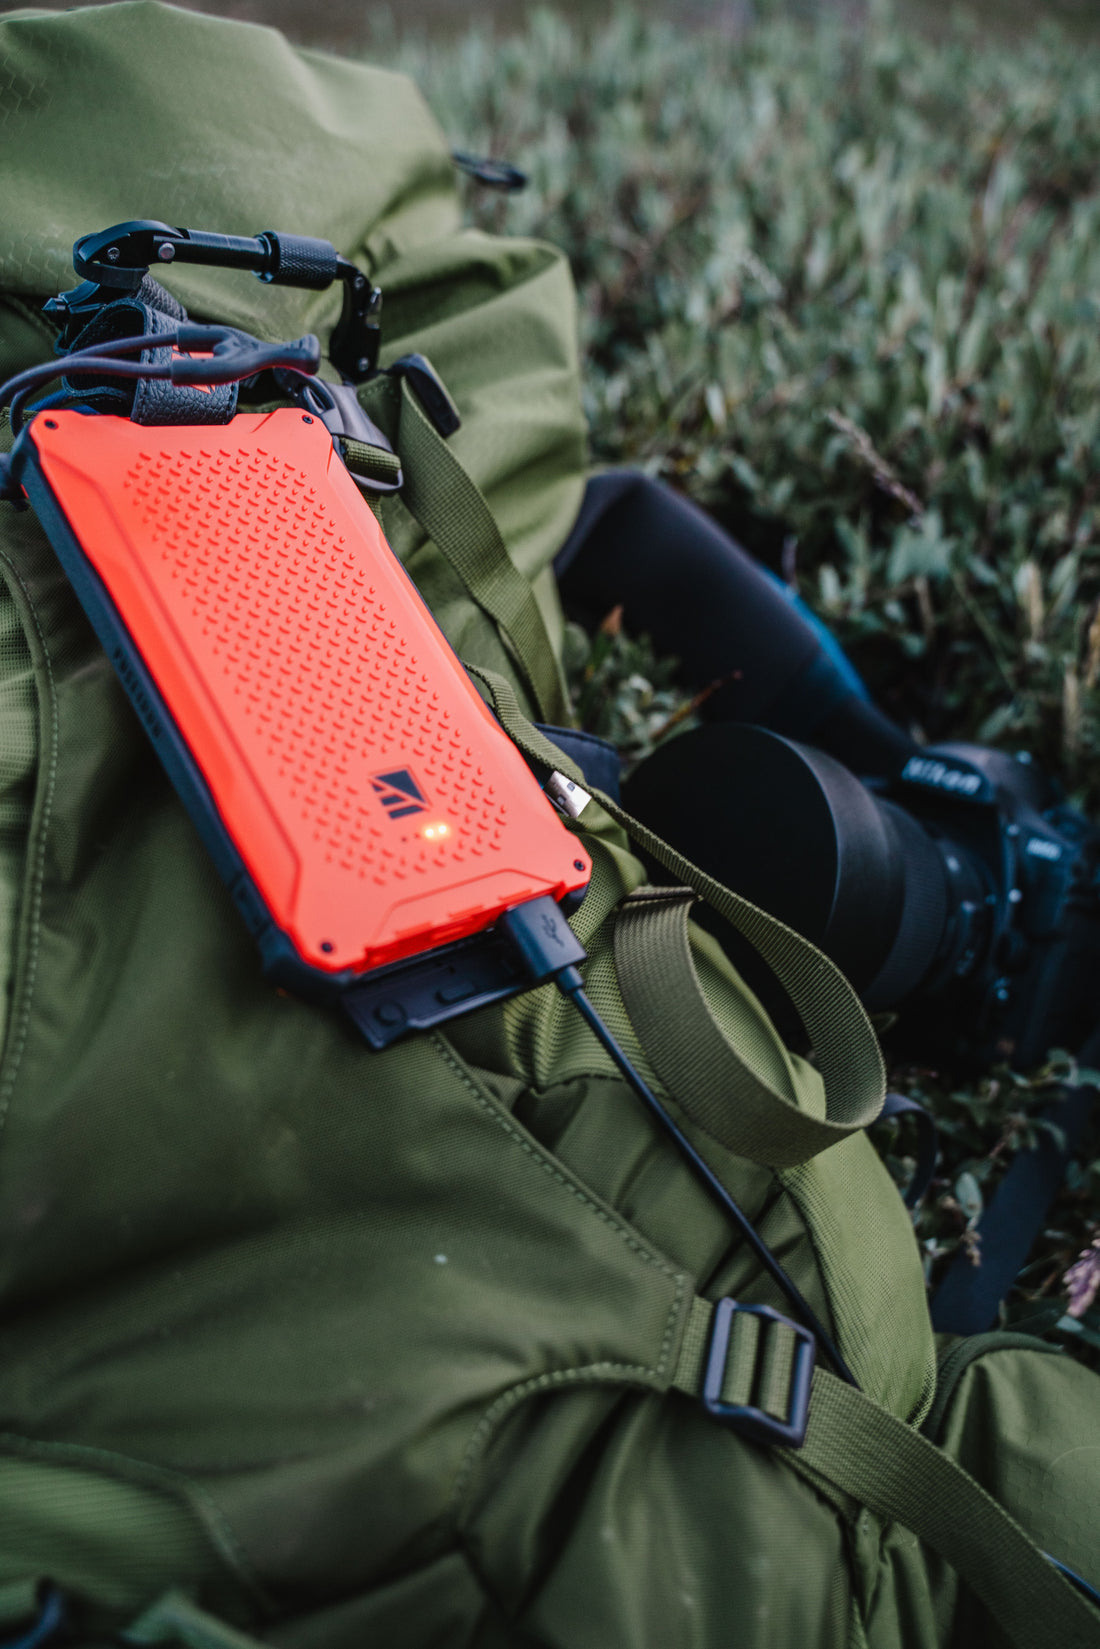 Choosing the Right Power Bank for Your Outdoor Adventures